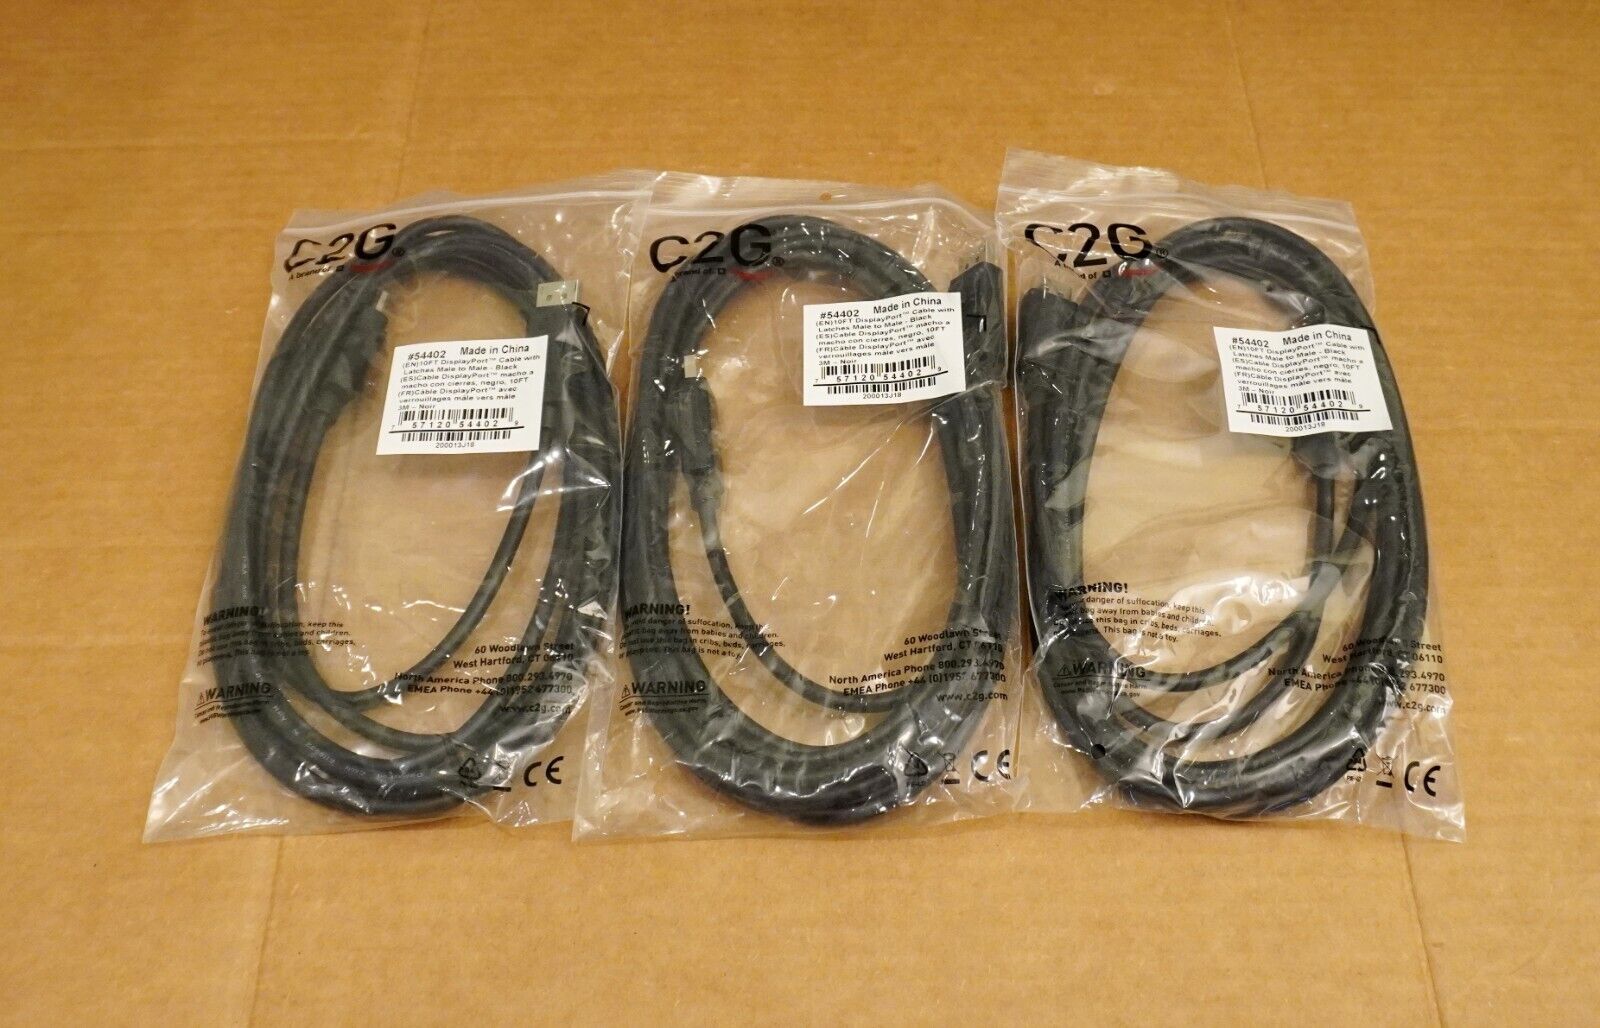 3X Lot C2G 10Ft 3M 4K 8K UHD 7680x4320 30V DisplayPort DP Male M/M Cable Latches